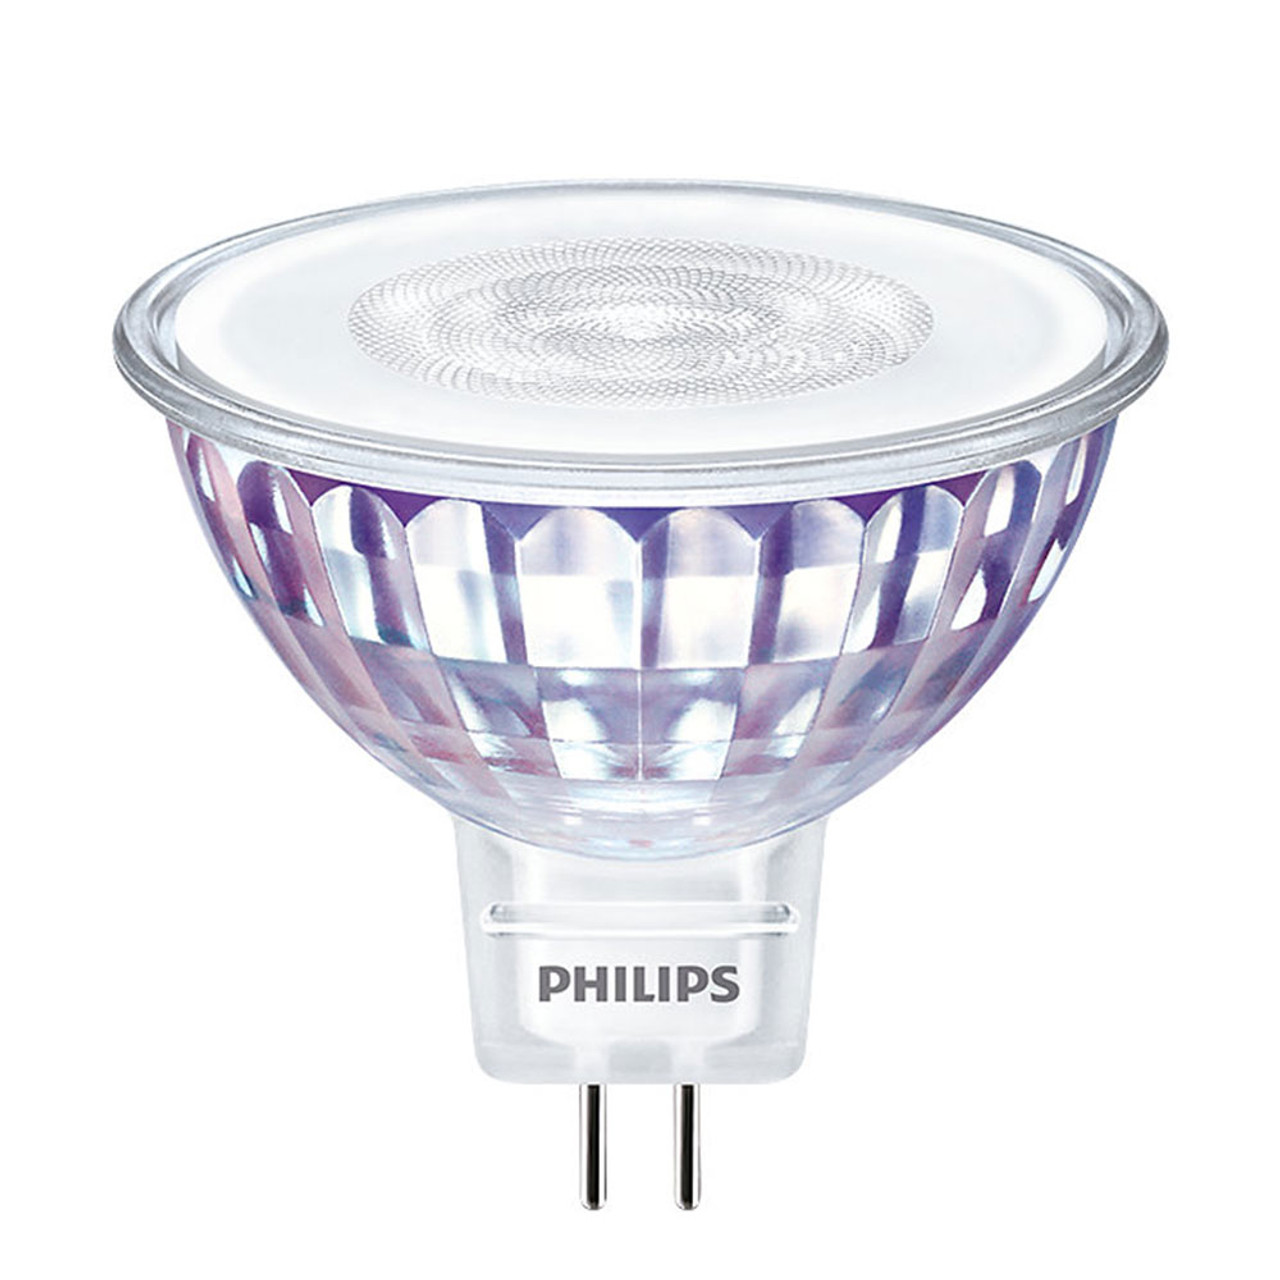 Philips Master LED 12V 5.8W Warm White 36 Degrees Dimmable RA90